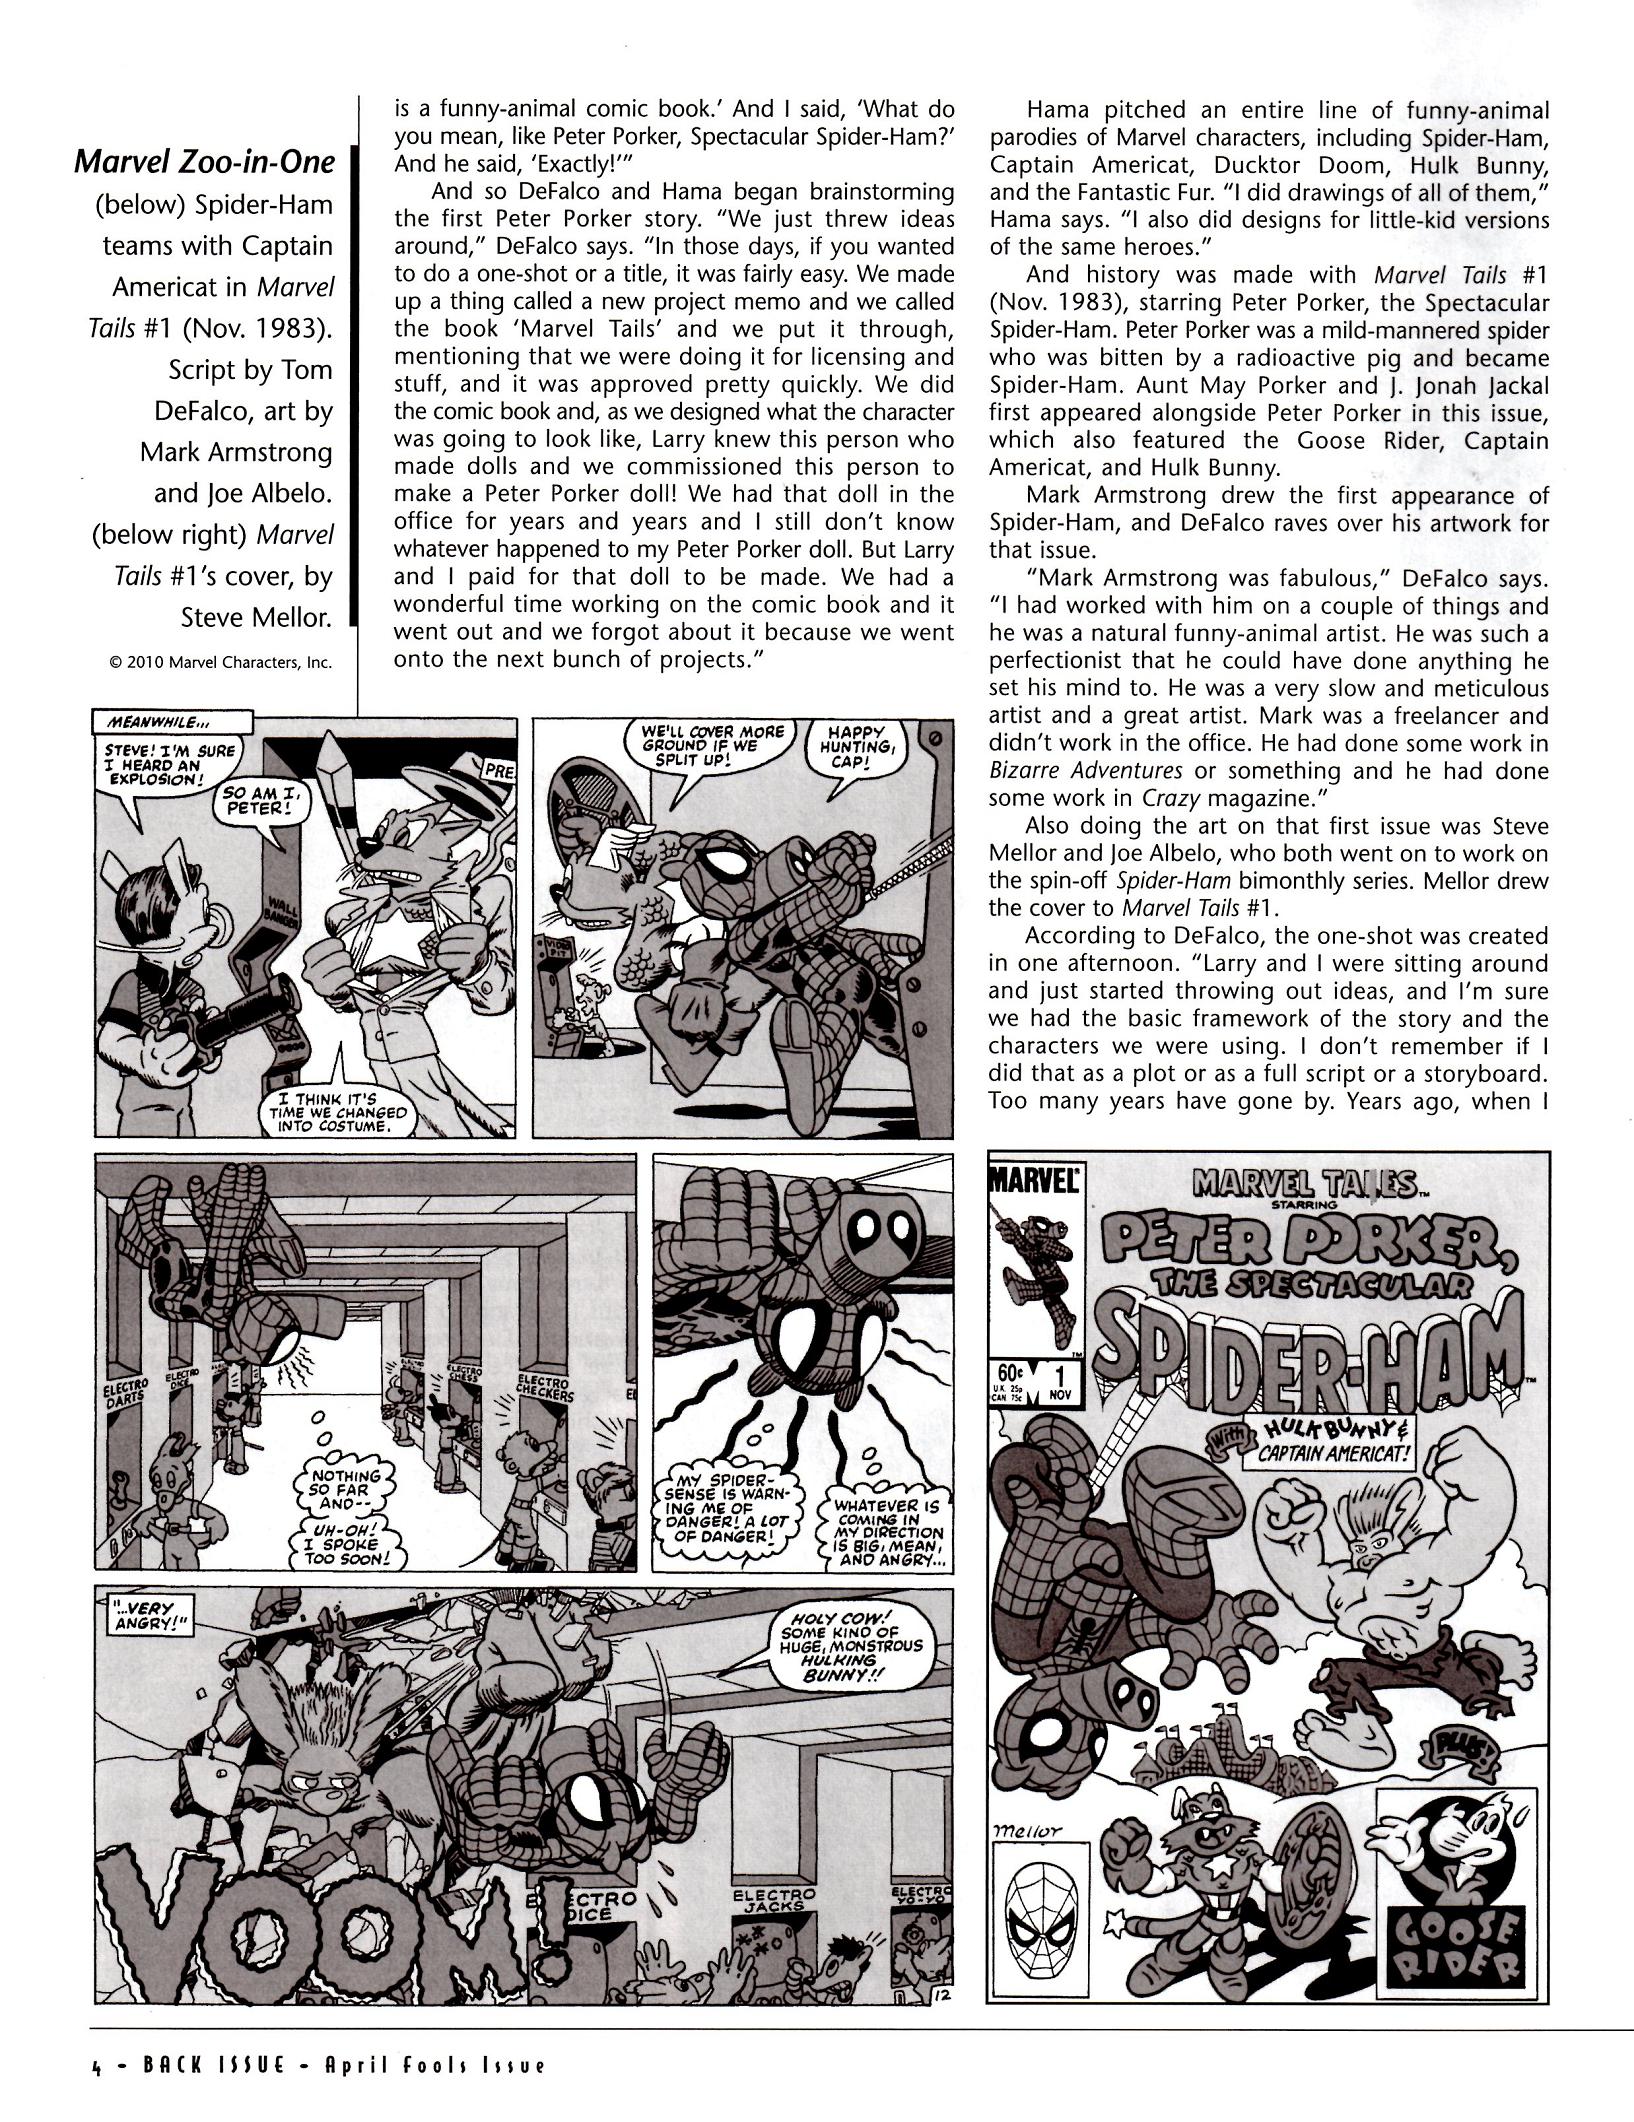 Read online Back Issue comic -  Issue #39 - 6